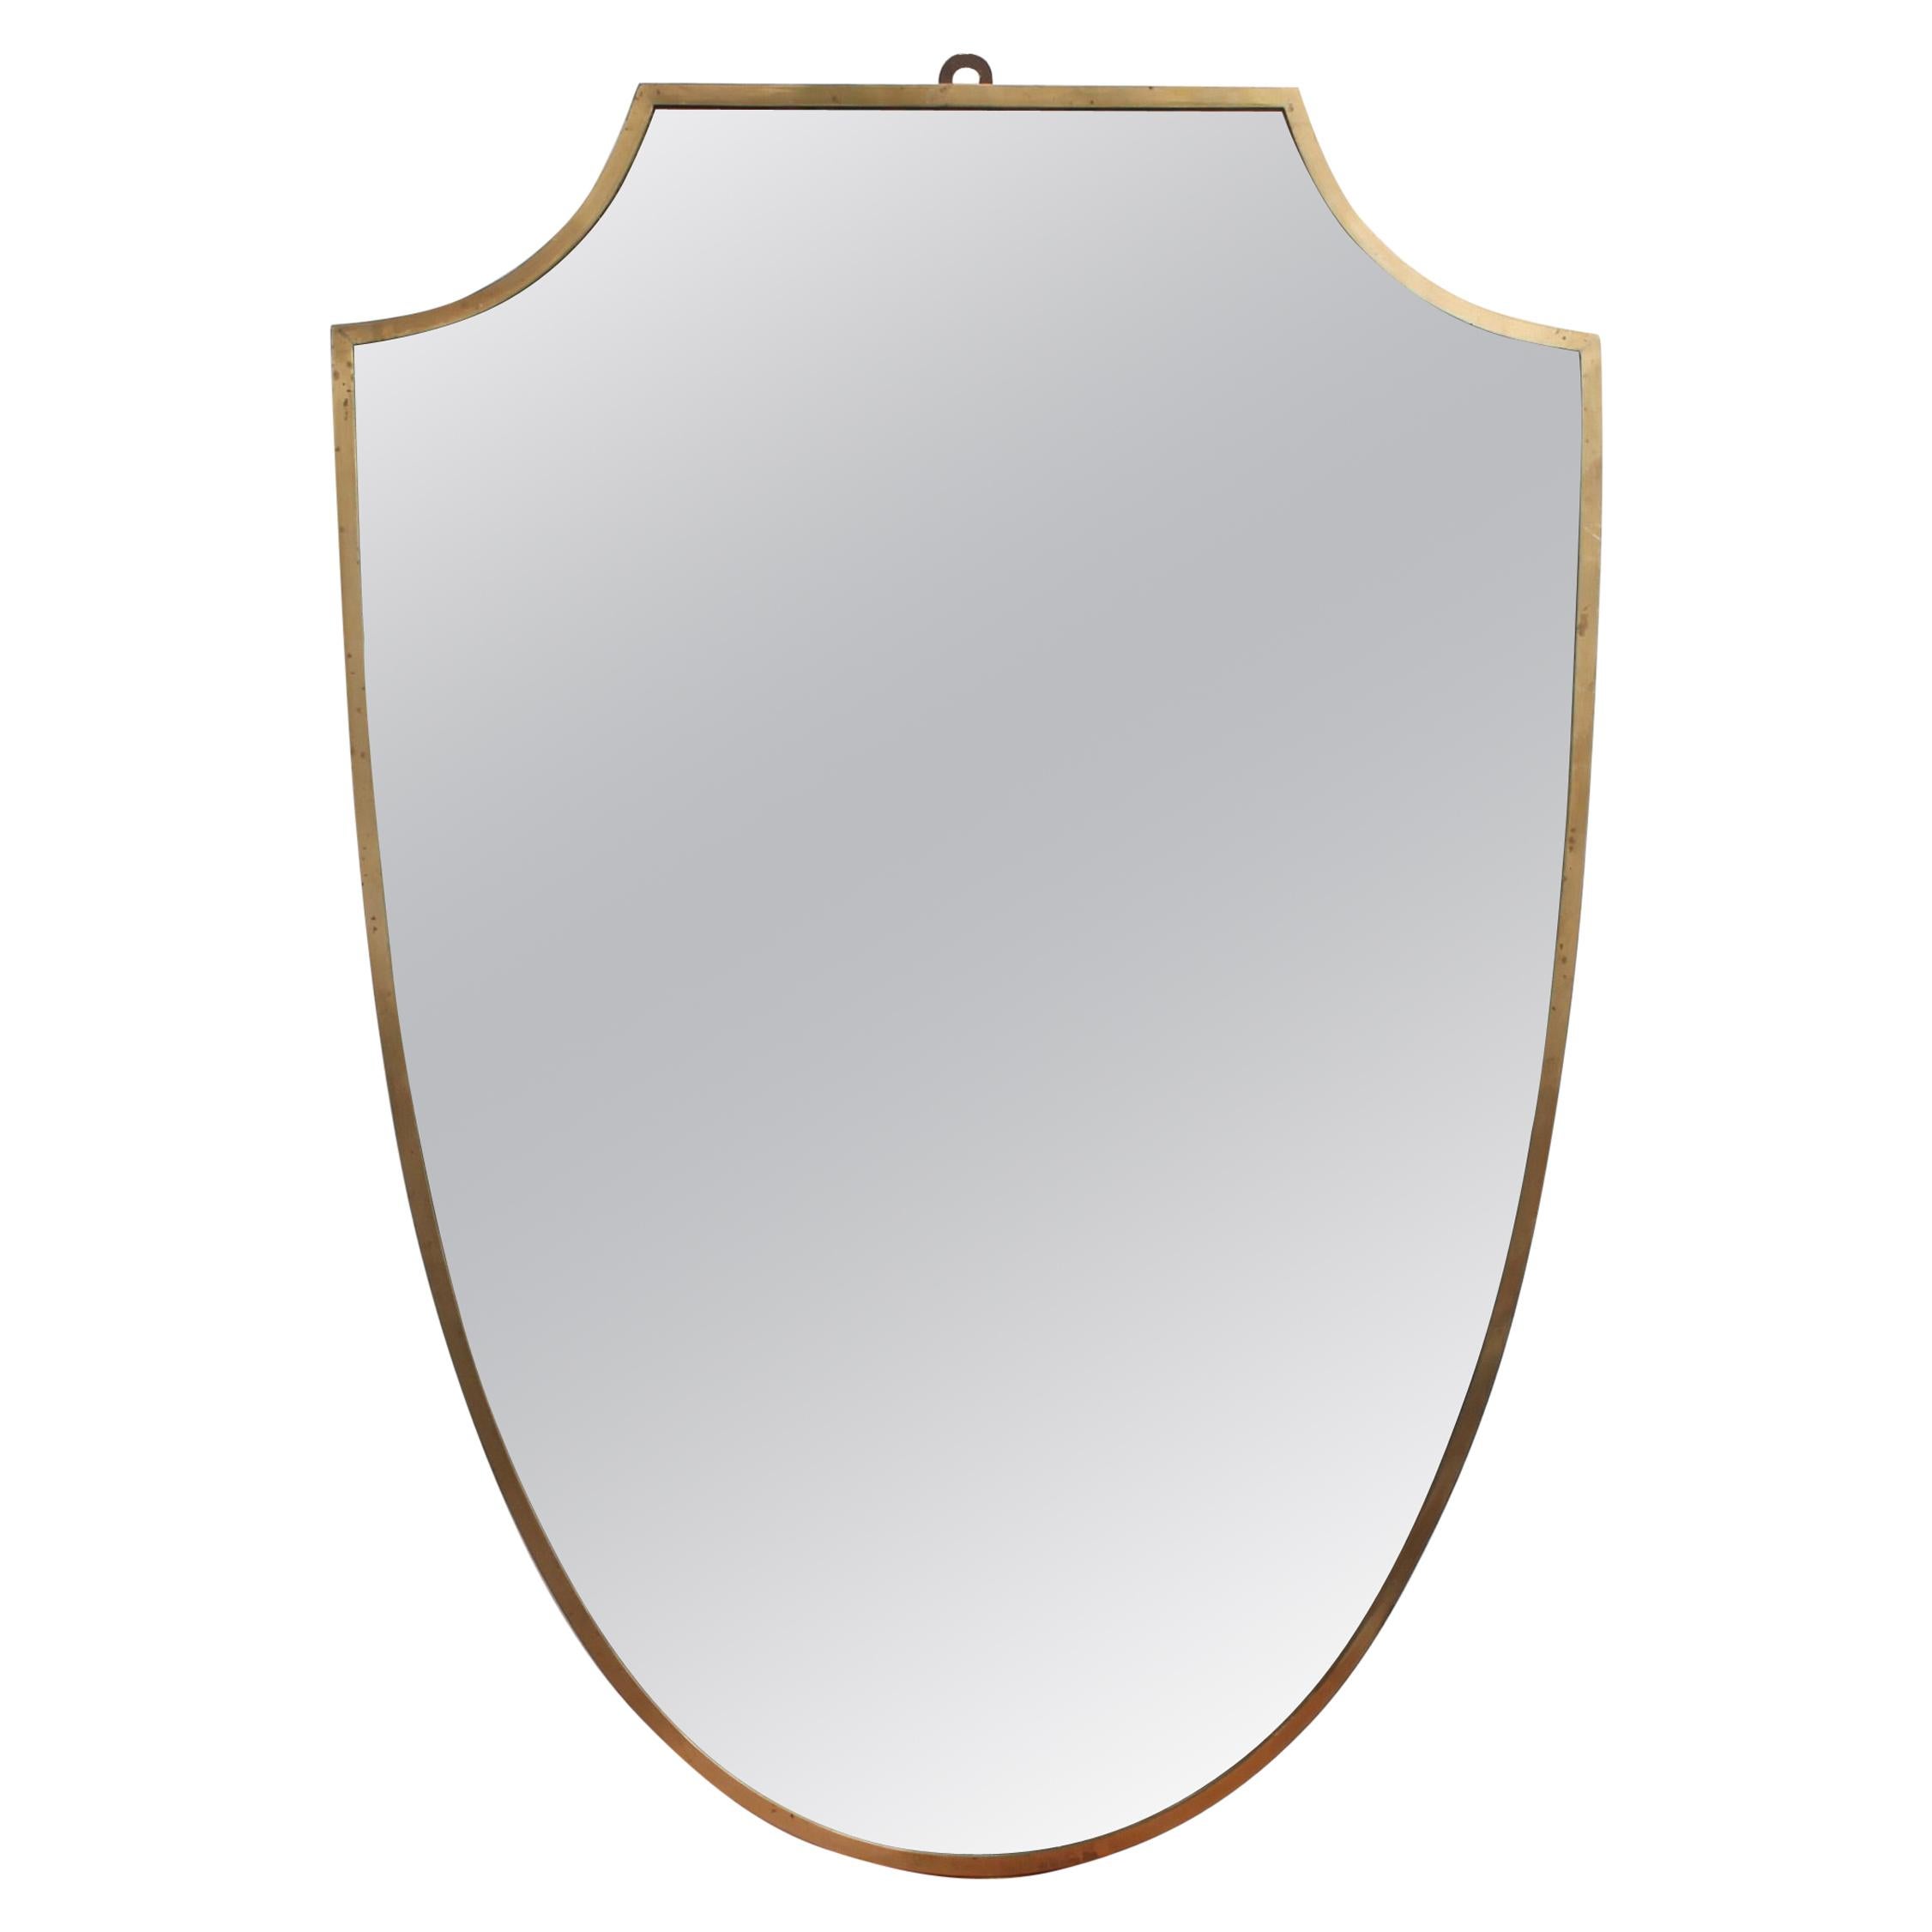 Midcentury Italian Crest-Shaped Wall Mirror with Brass Frame, circa 1950s